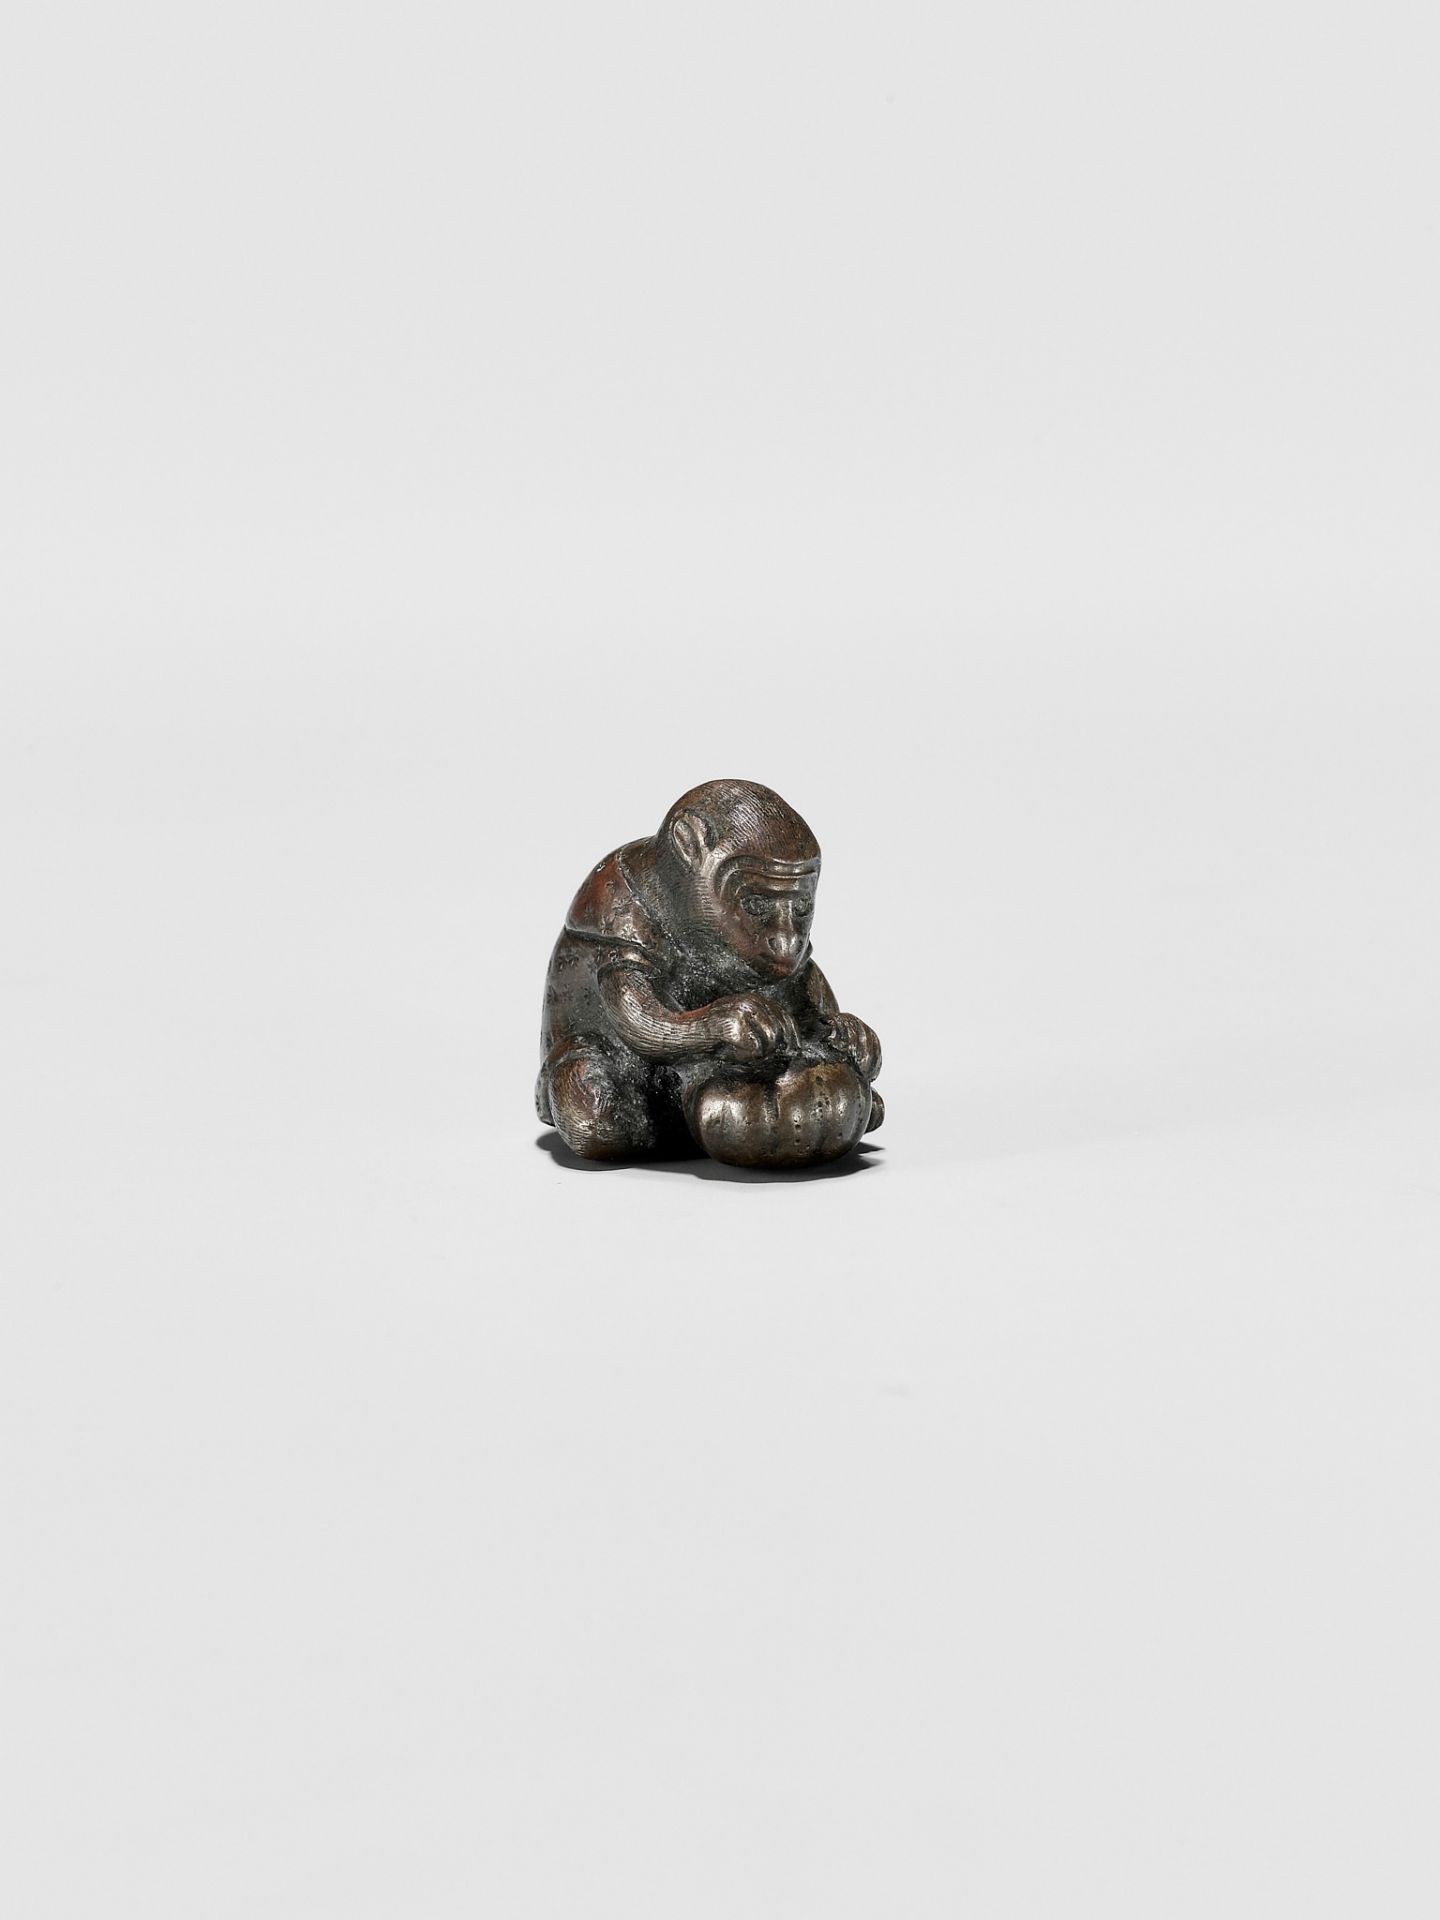 A RARE BRONZE NETSUKE OF A MONKEY WITH GOURD - Image 7 of 9